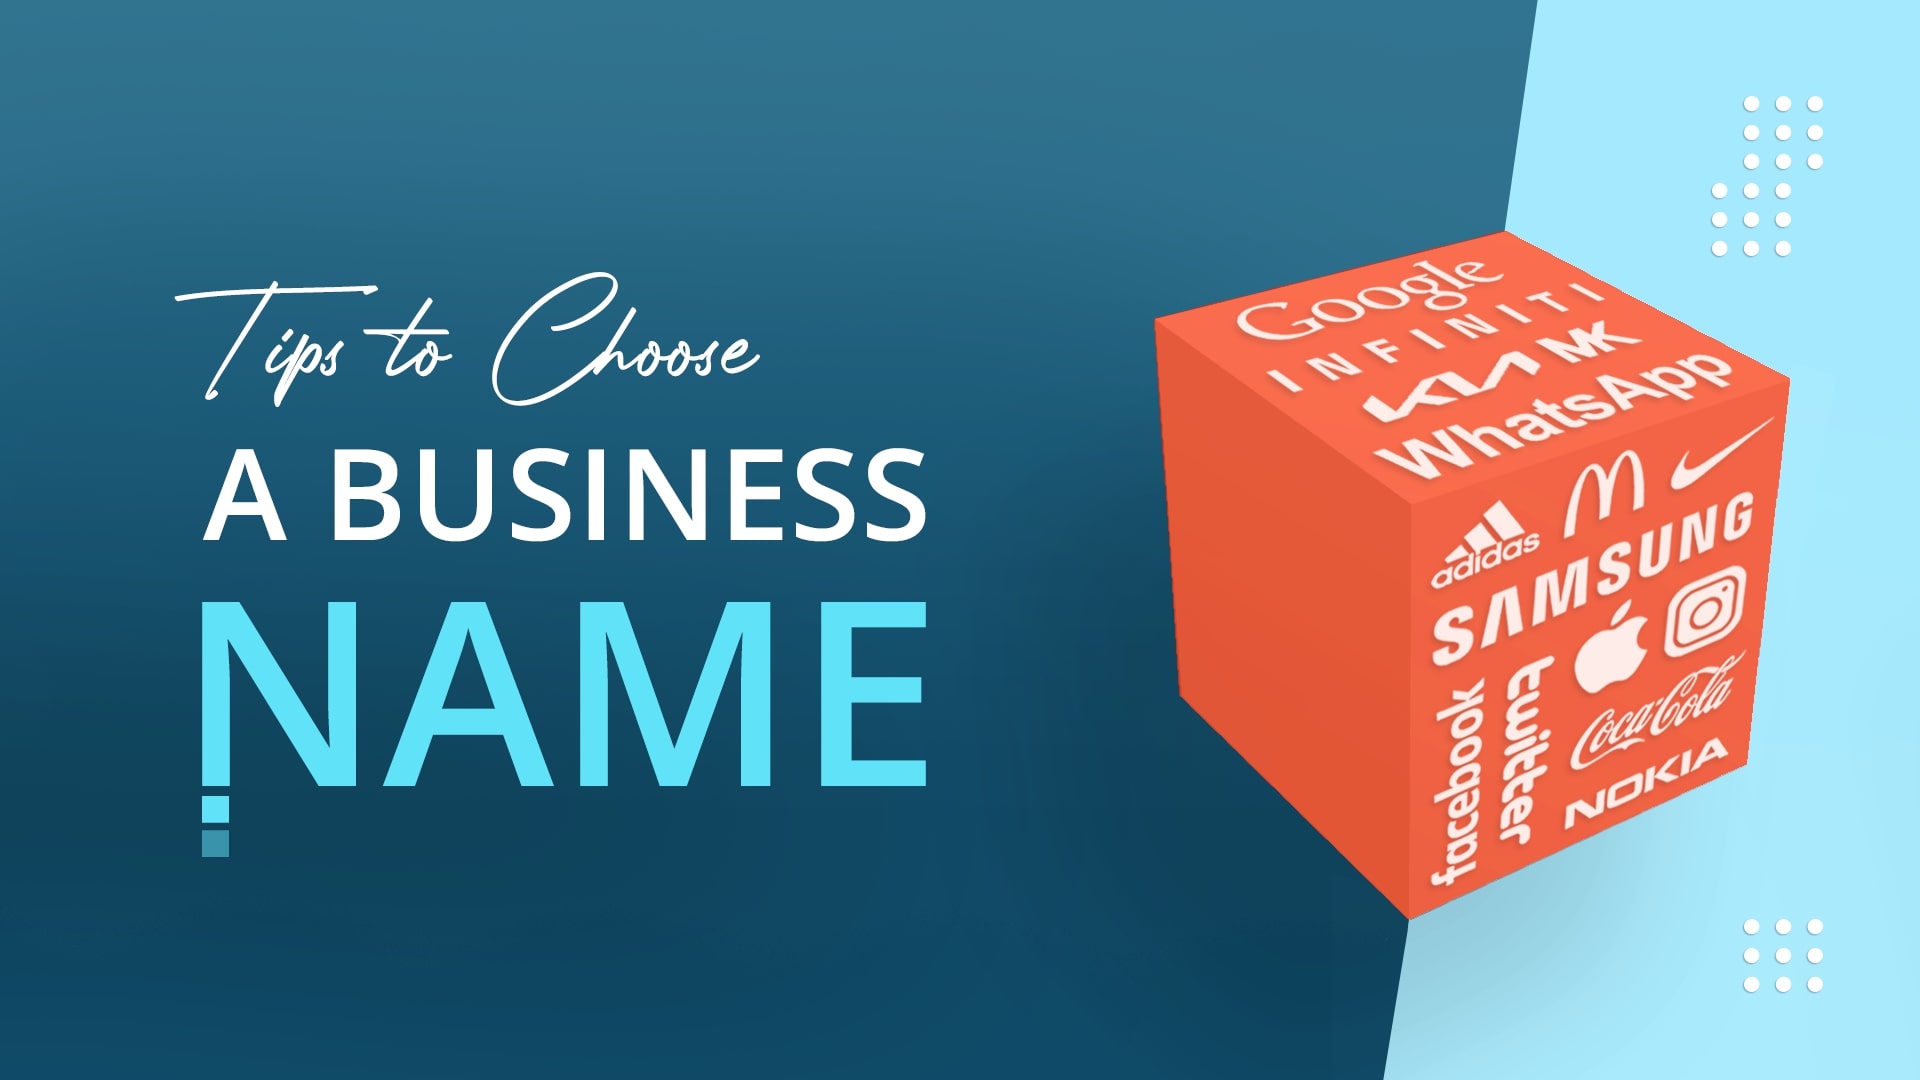 4 Tips to Choose a Business Name